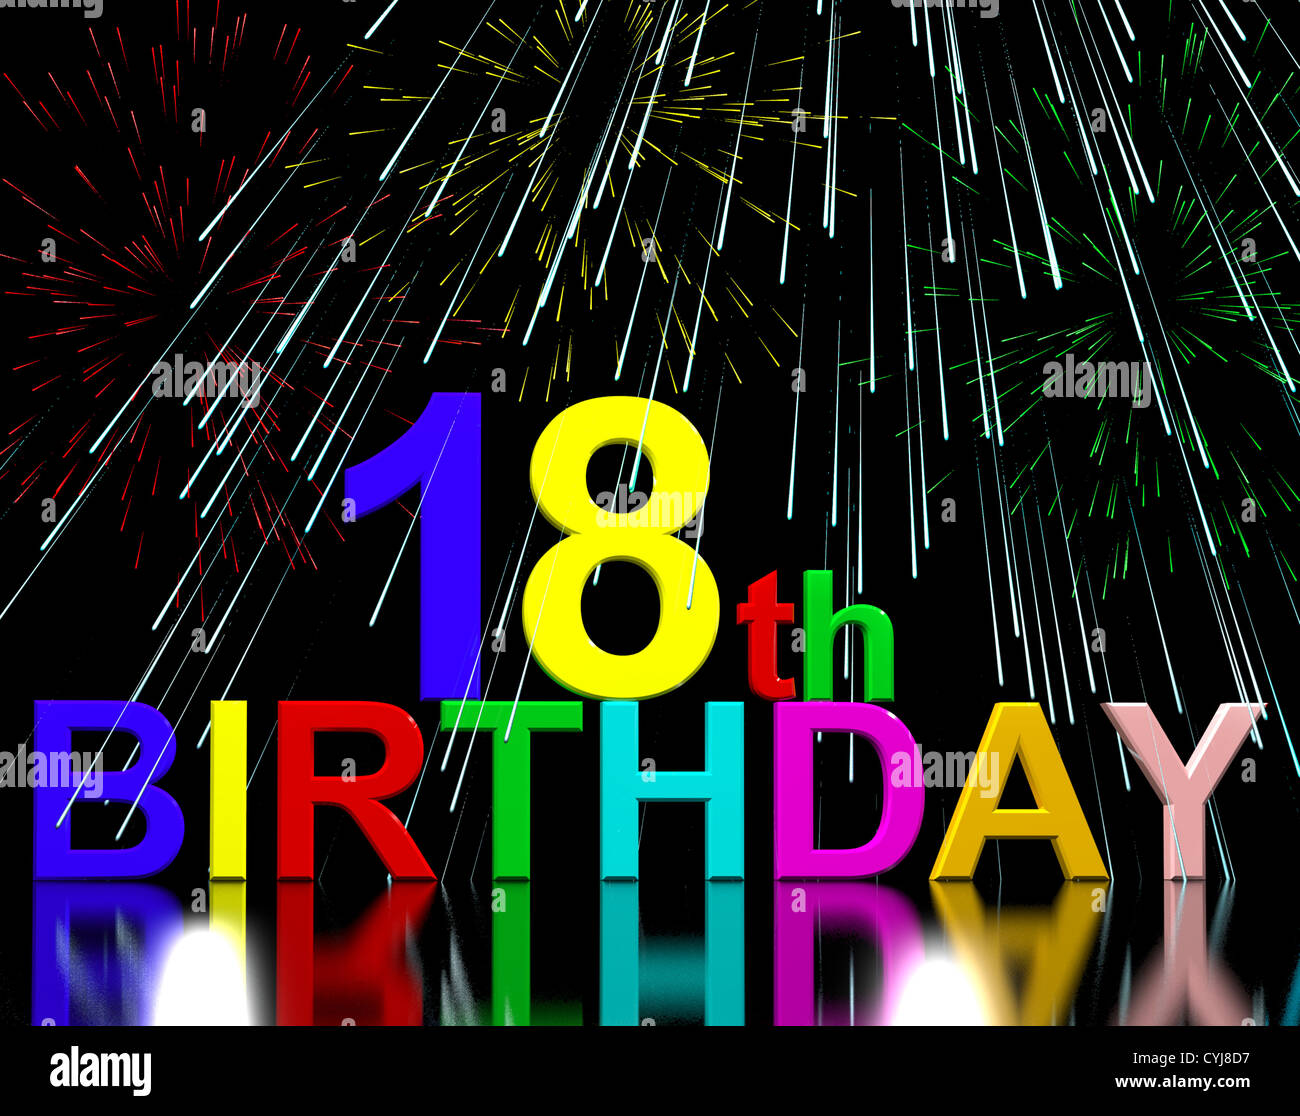 18th or Eighteenth Birthday Celebrated With Fireworks Display Stock Photo